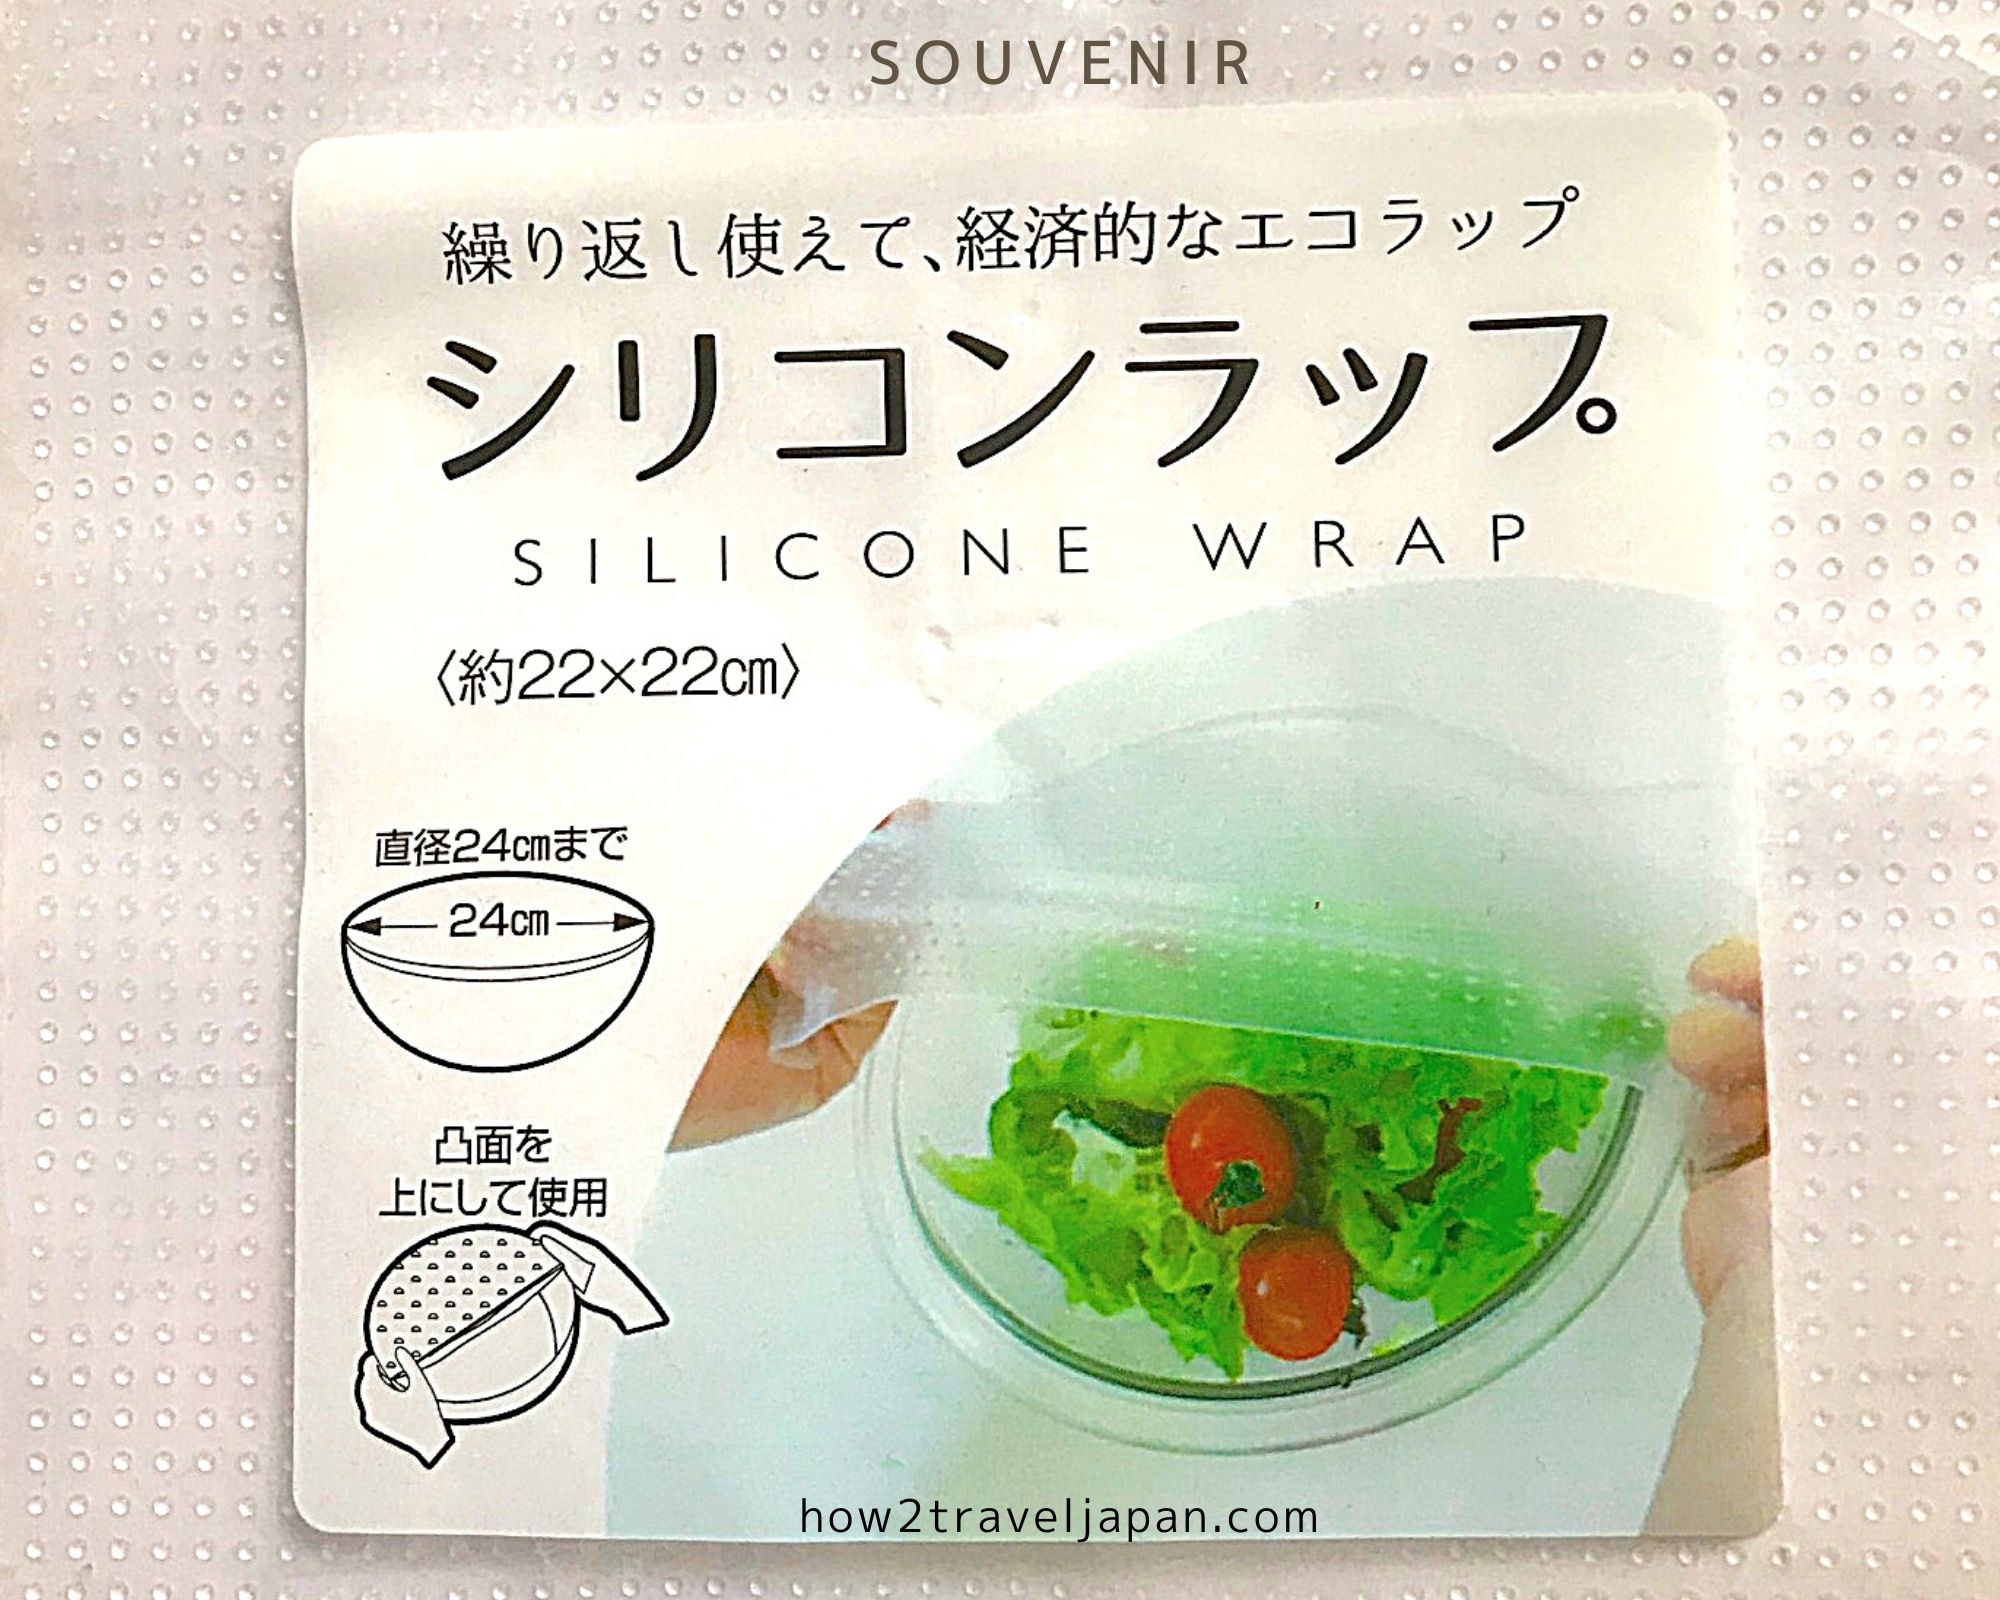 You are currently viewing The 100 Yen silicone wrap